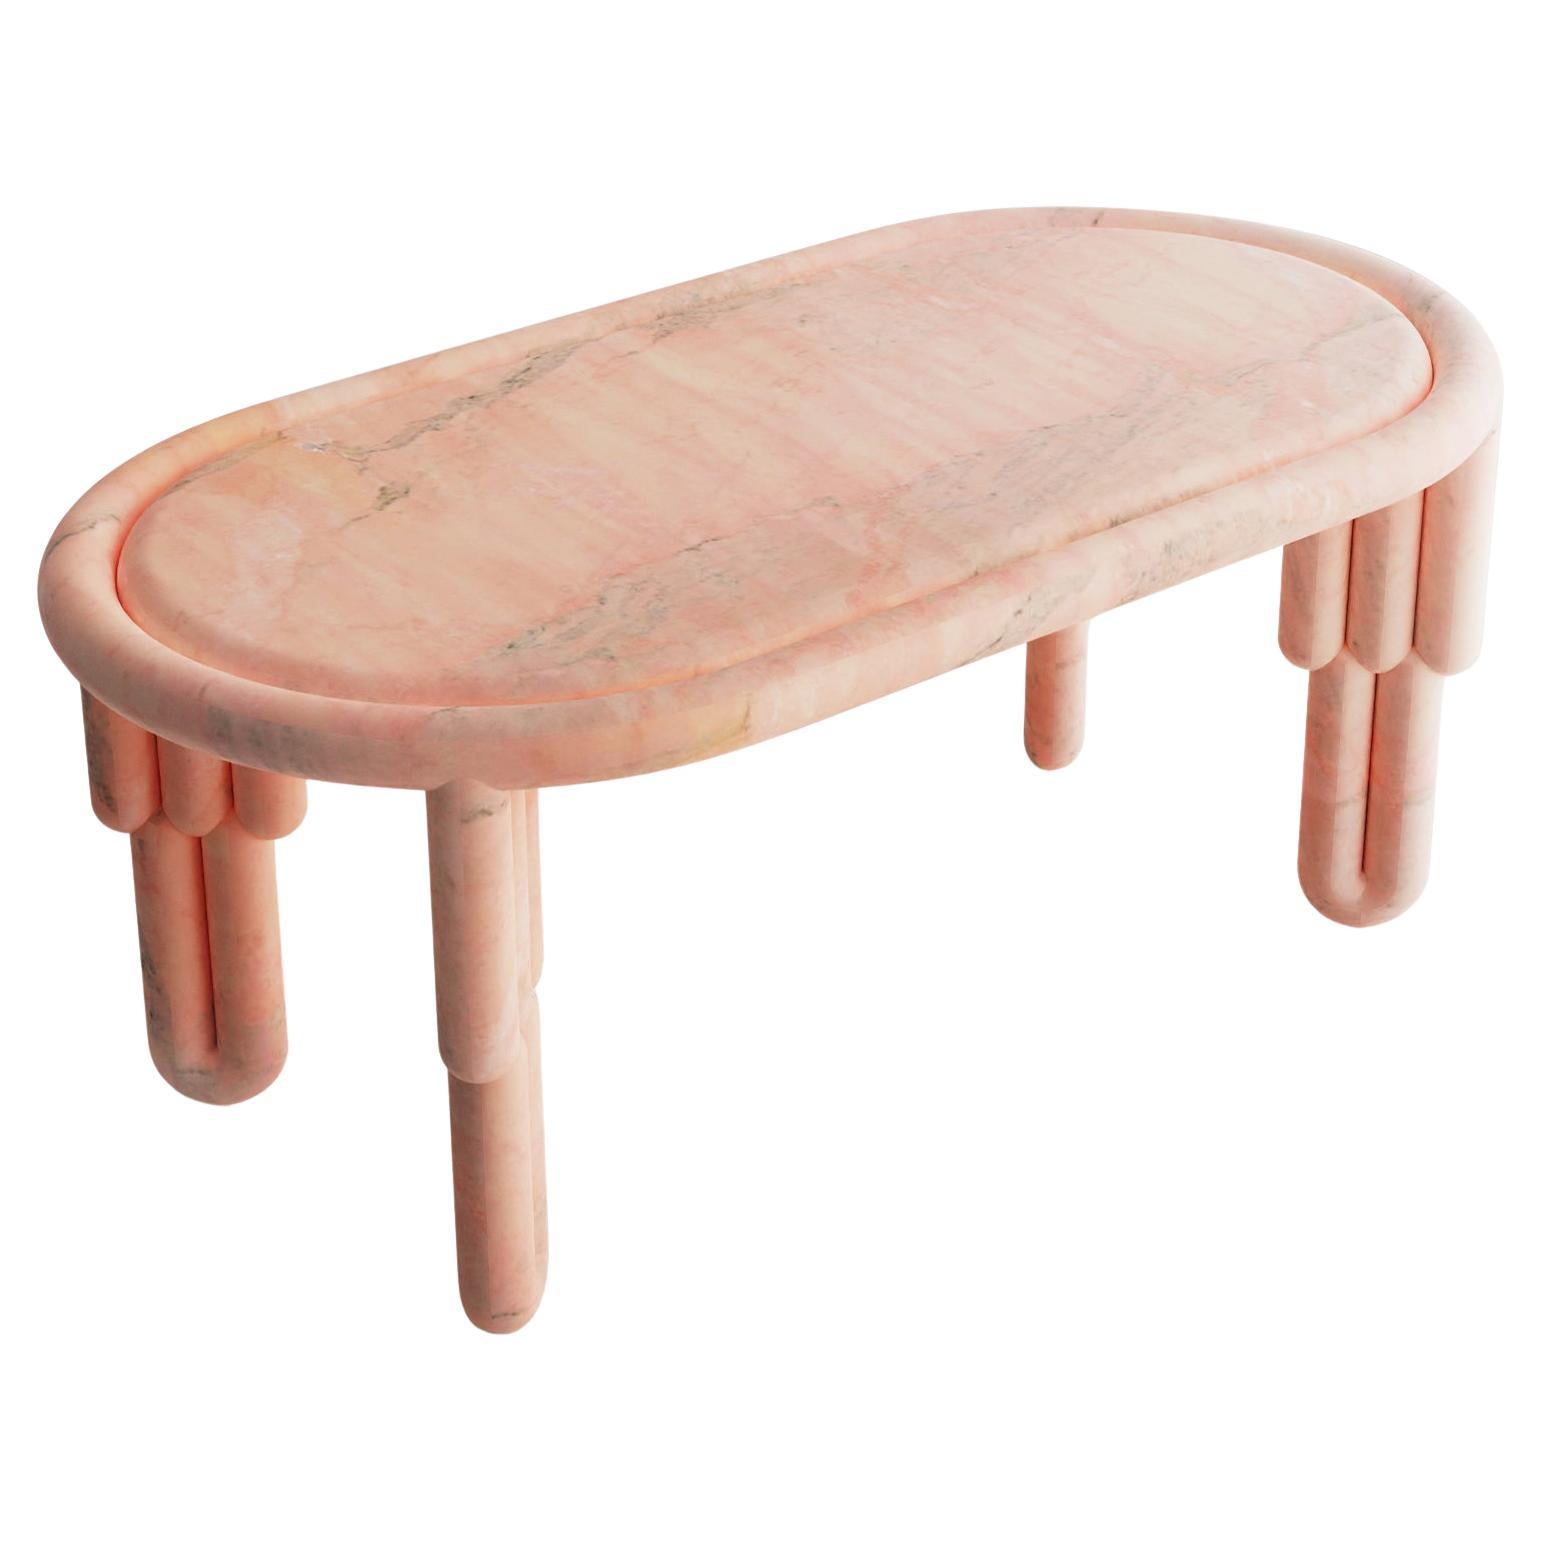 Sculptural Kipferl Dining Table by Lara Bohinc in Rosa Portugalo Marble